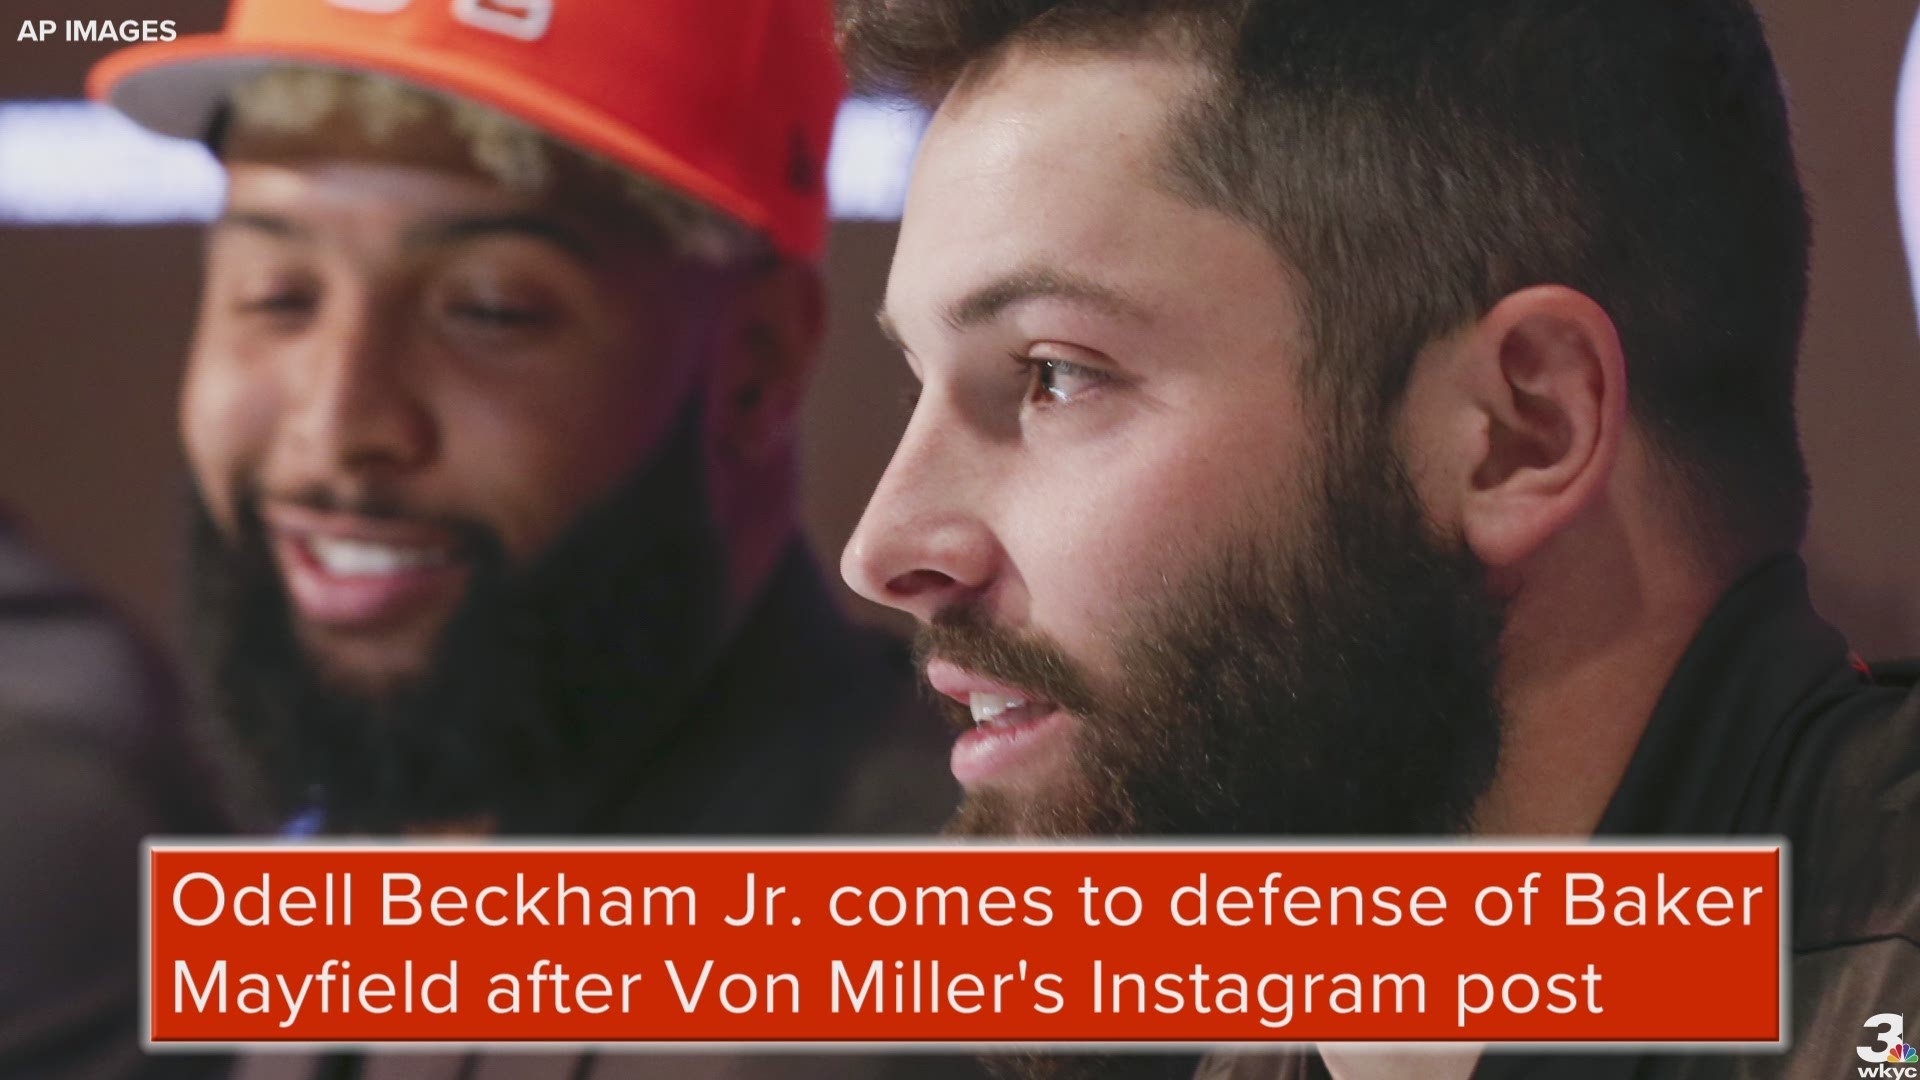 New Cleveland Browns receiver Odell Beckham Jr. was quick to come to the defense of quarterback Baker Mayfield after Von Miller's Instagram post.